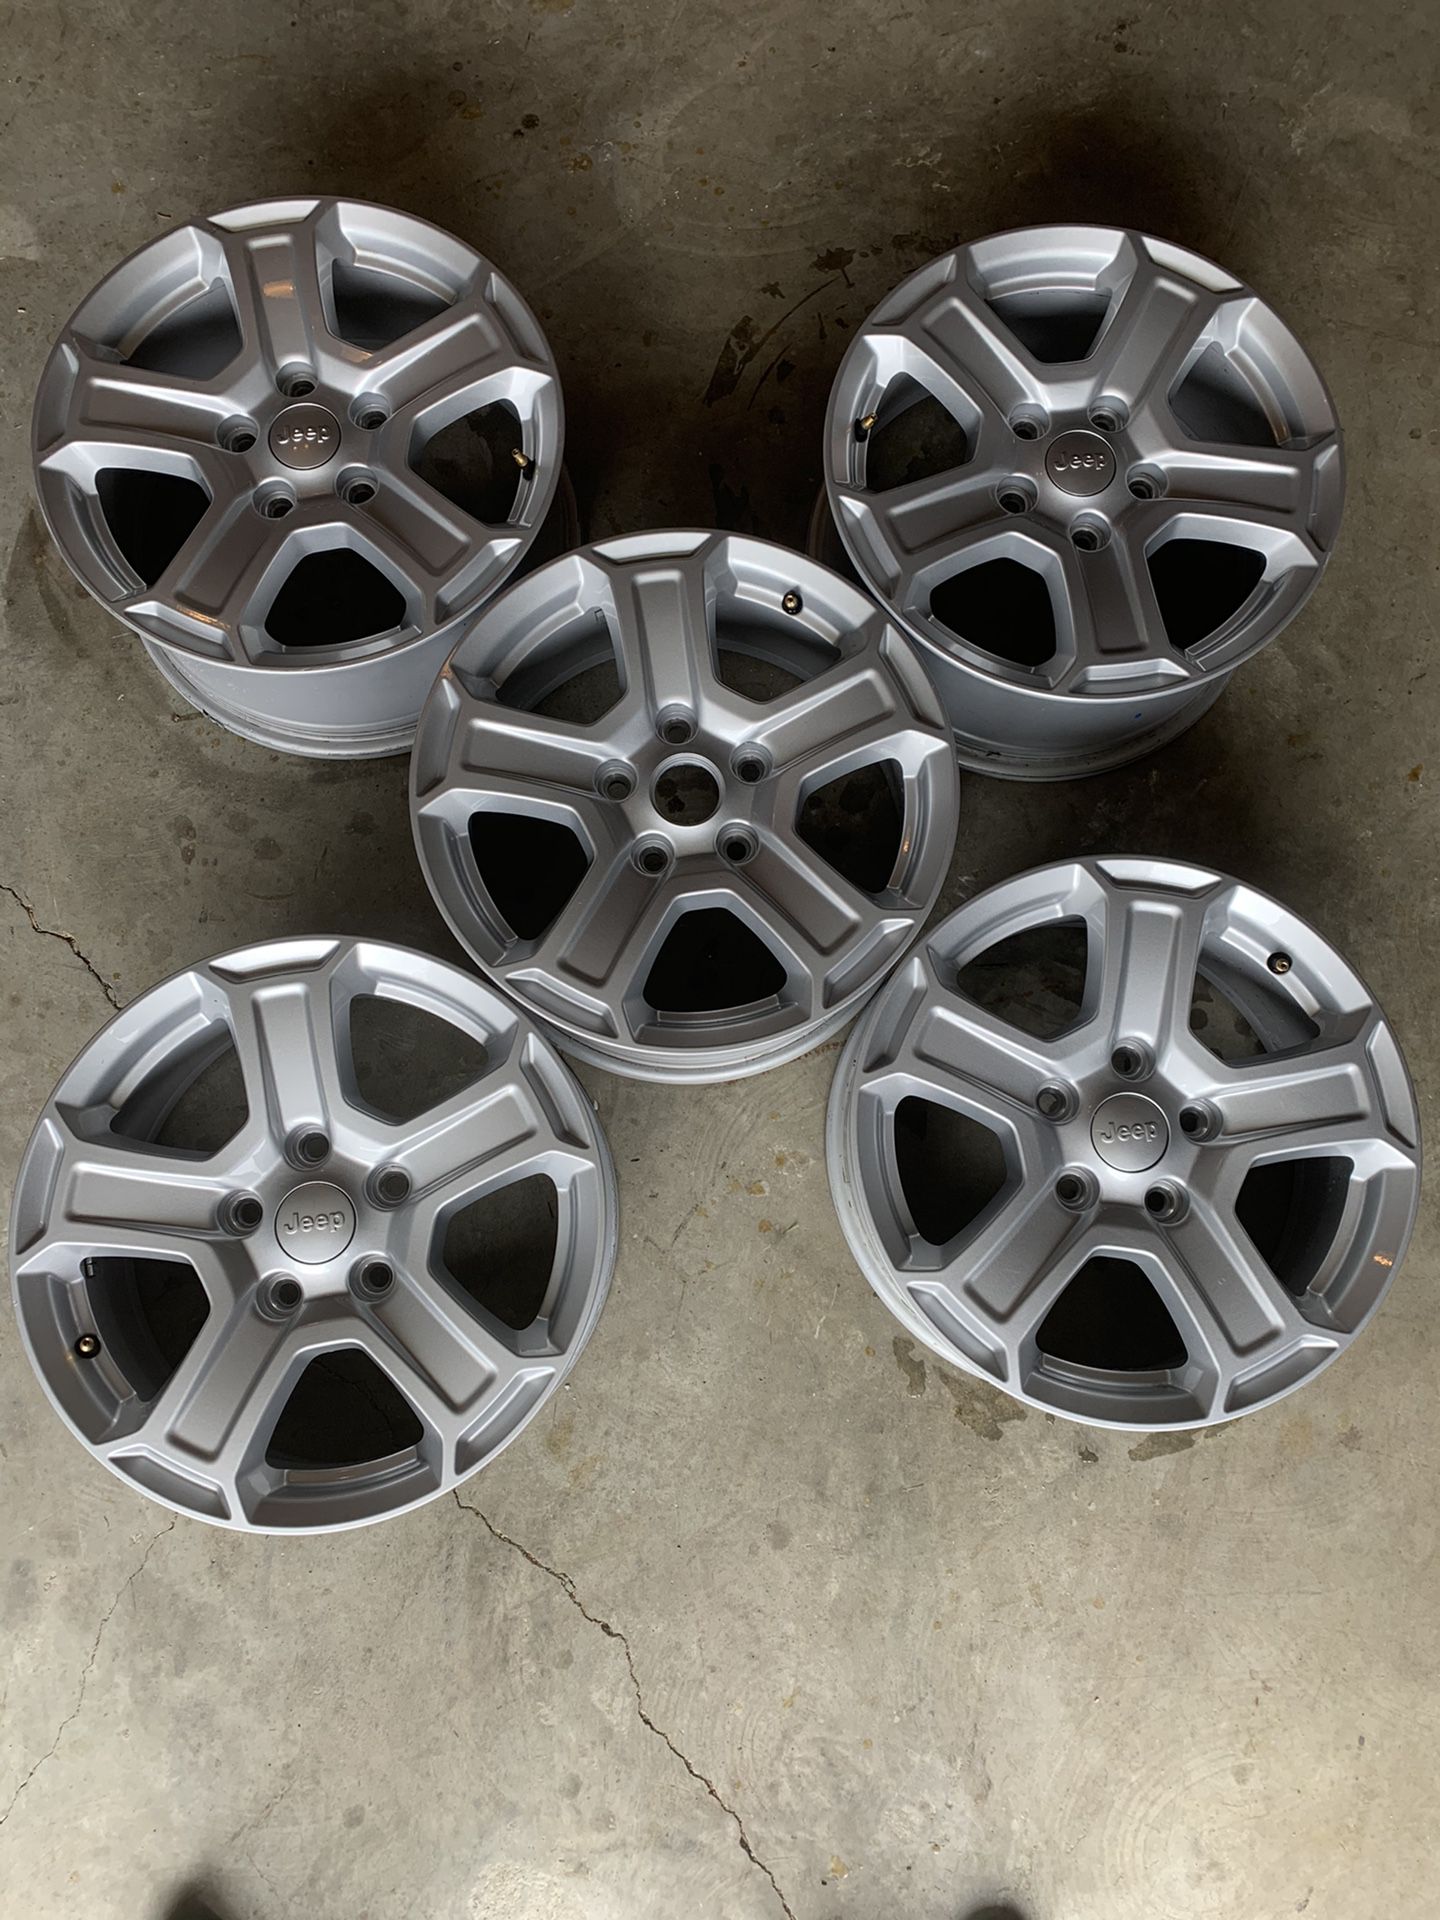 ALY9216 Jeep Wrangler wheels Painted silver 2019-20 set of 5